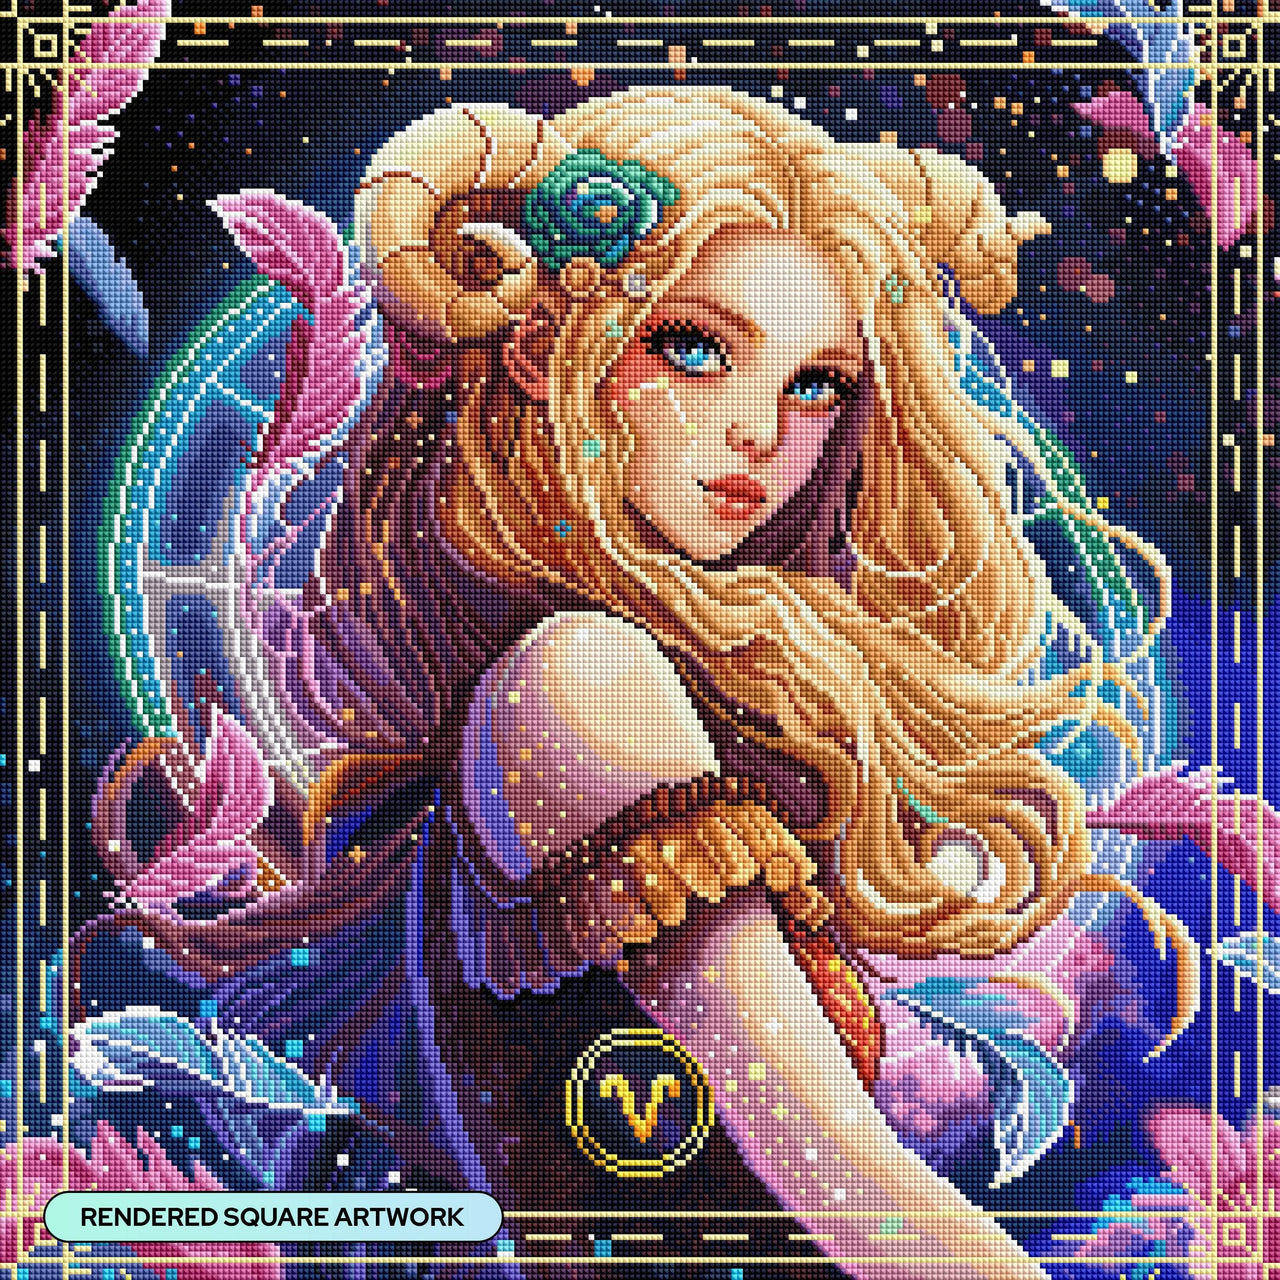 Diamond Painting Aries 22" x 22" (55.8cm x 55.8cm) / Square with 64 Colors including 4 ABs and 1 Iridescent Diamonds / 50,176